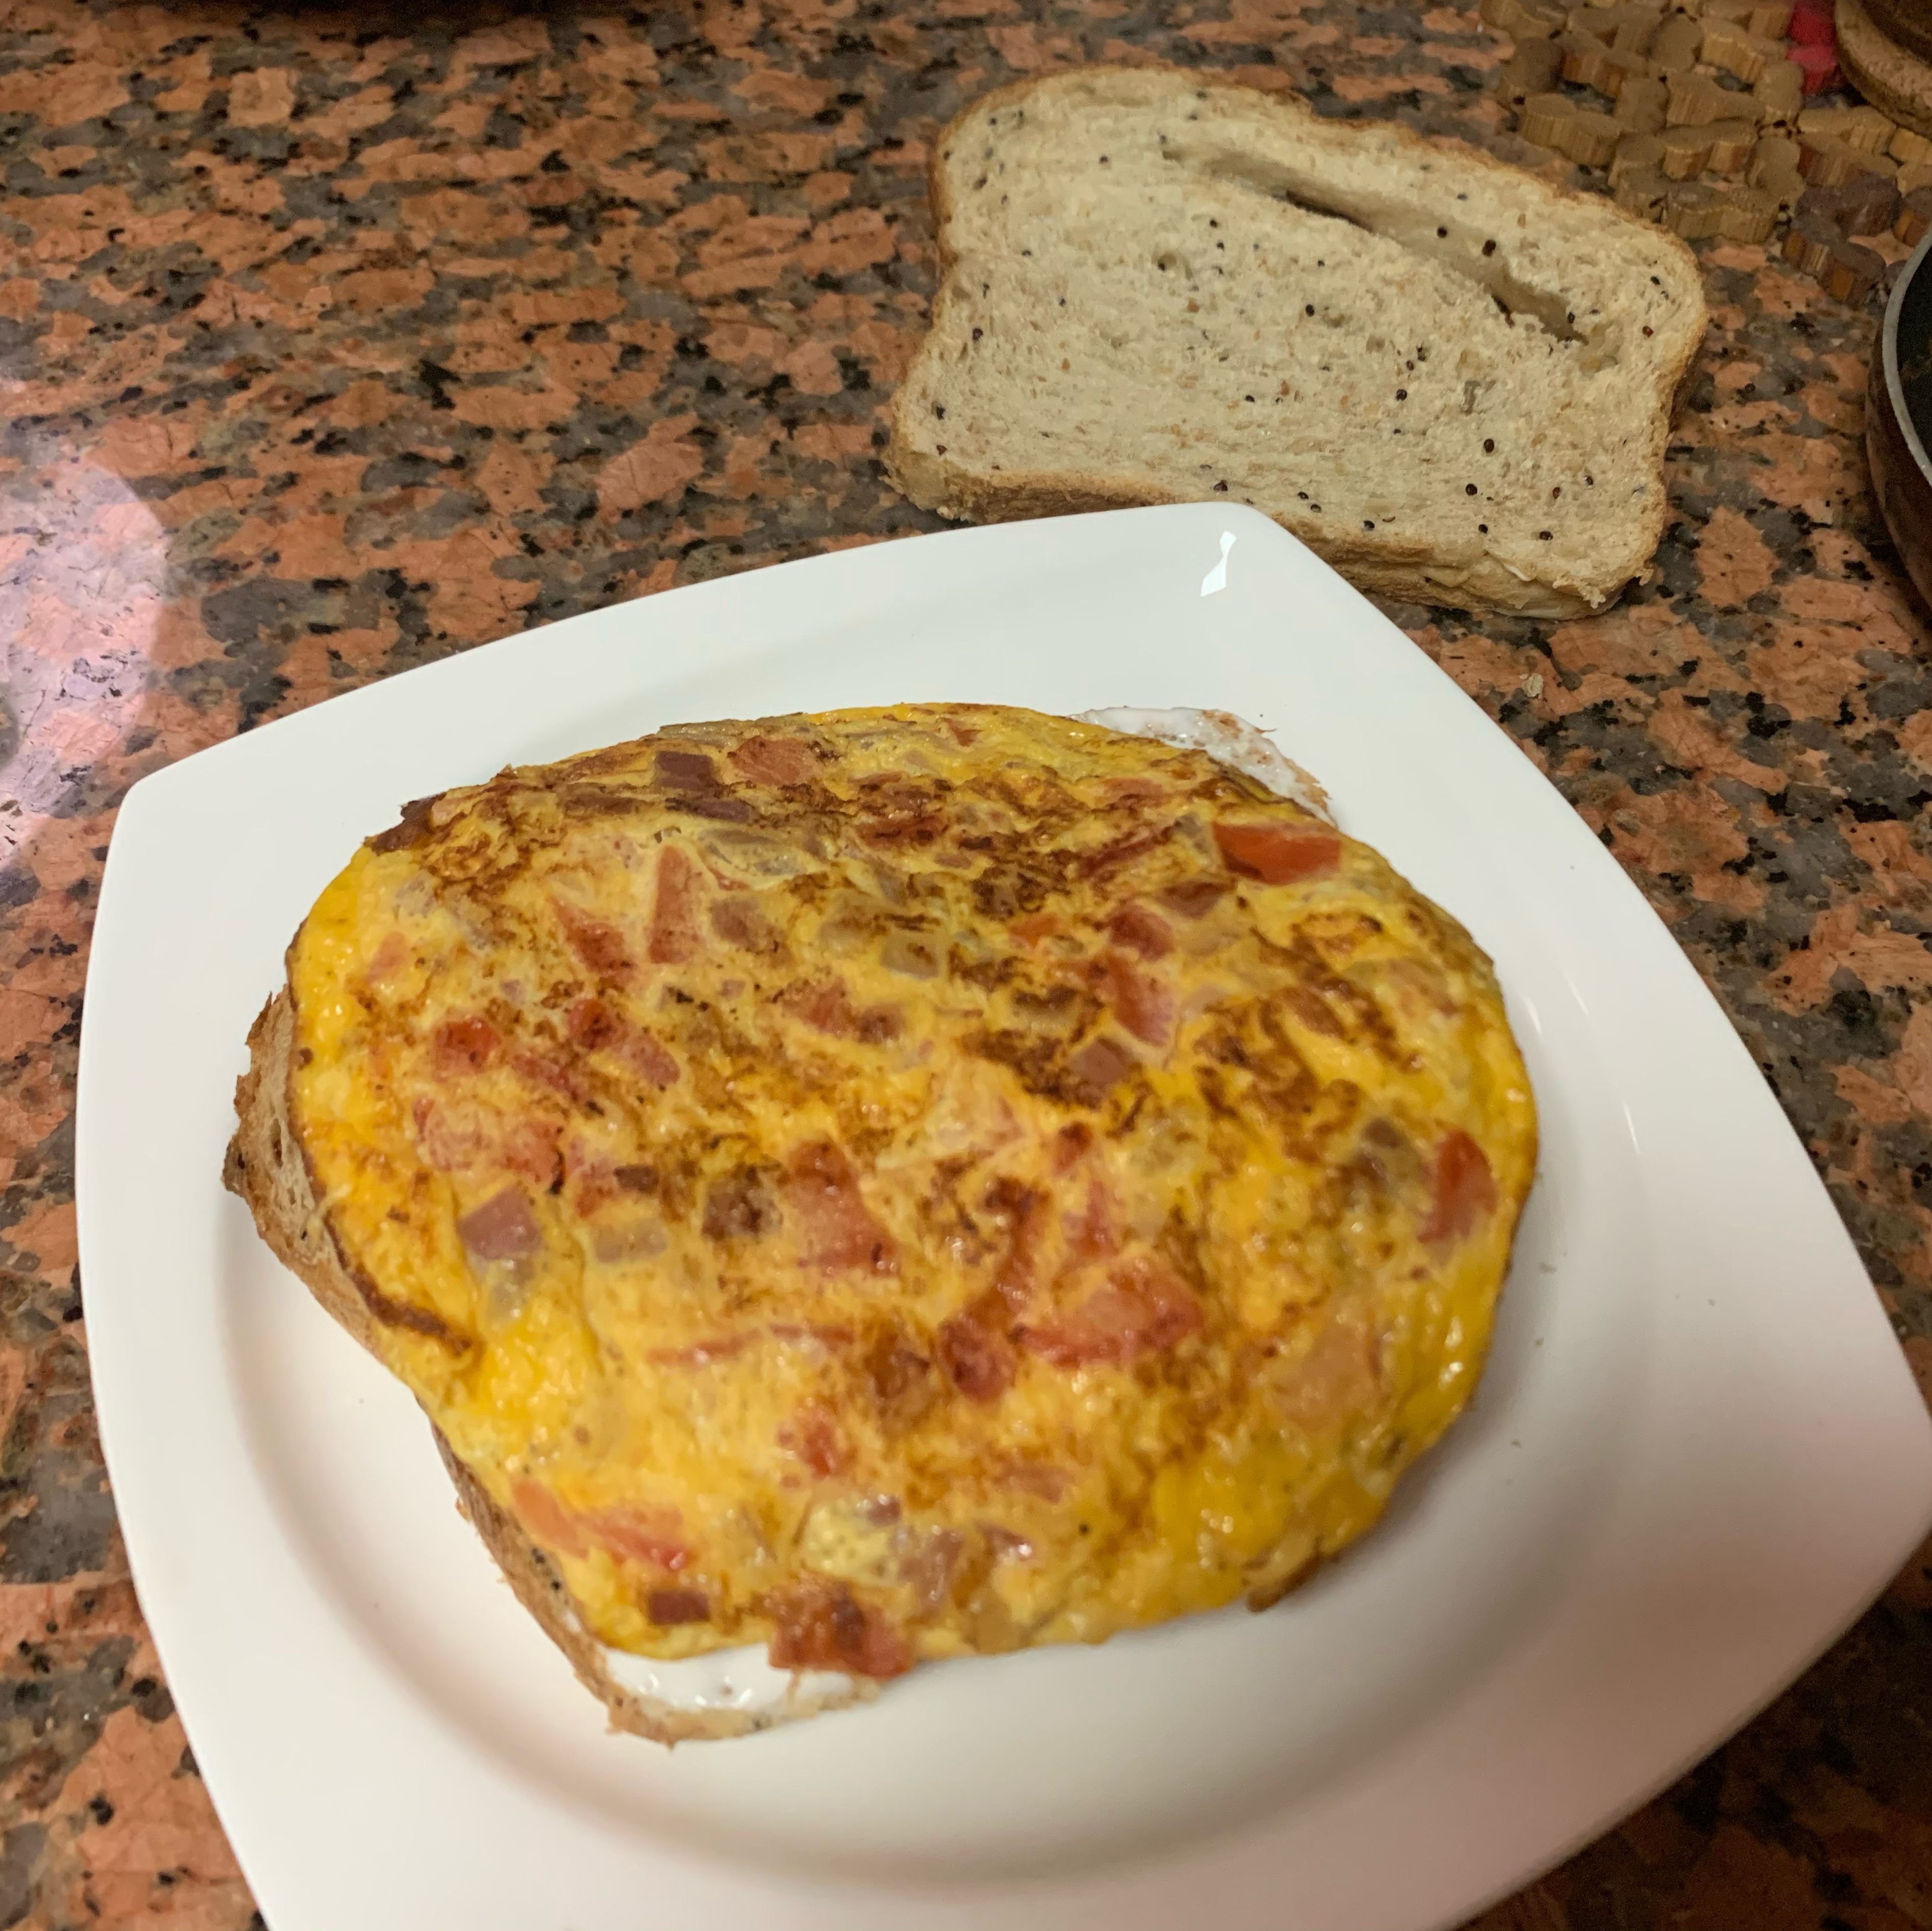 Put the omelet in the bread